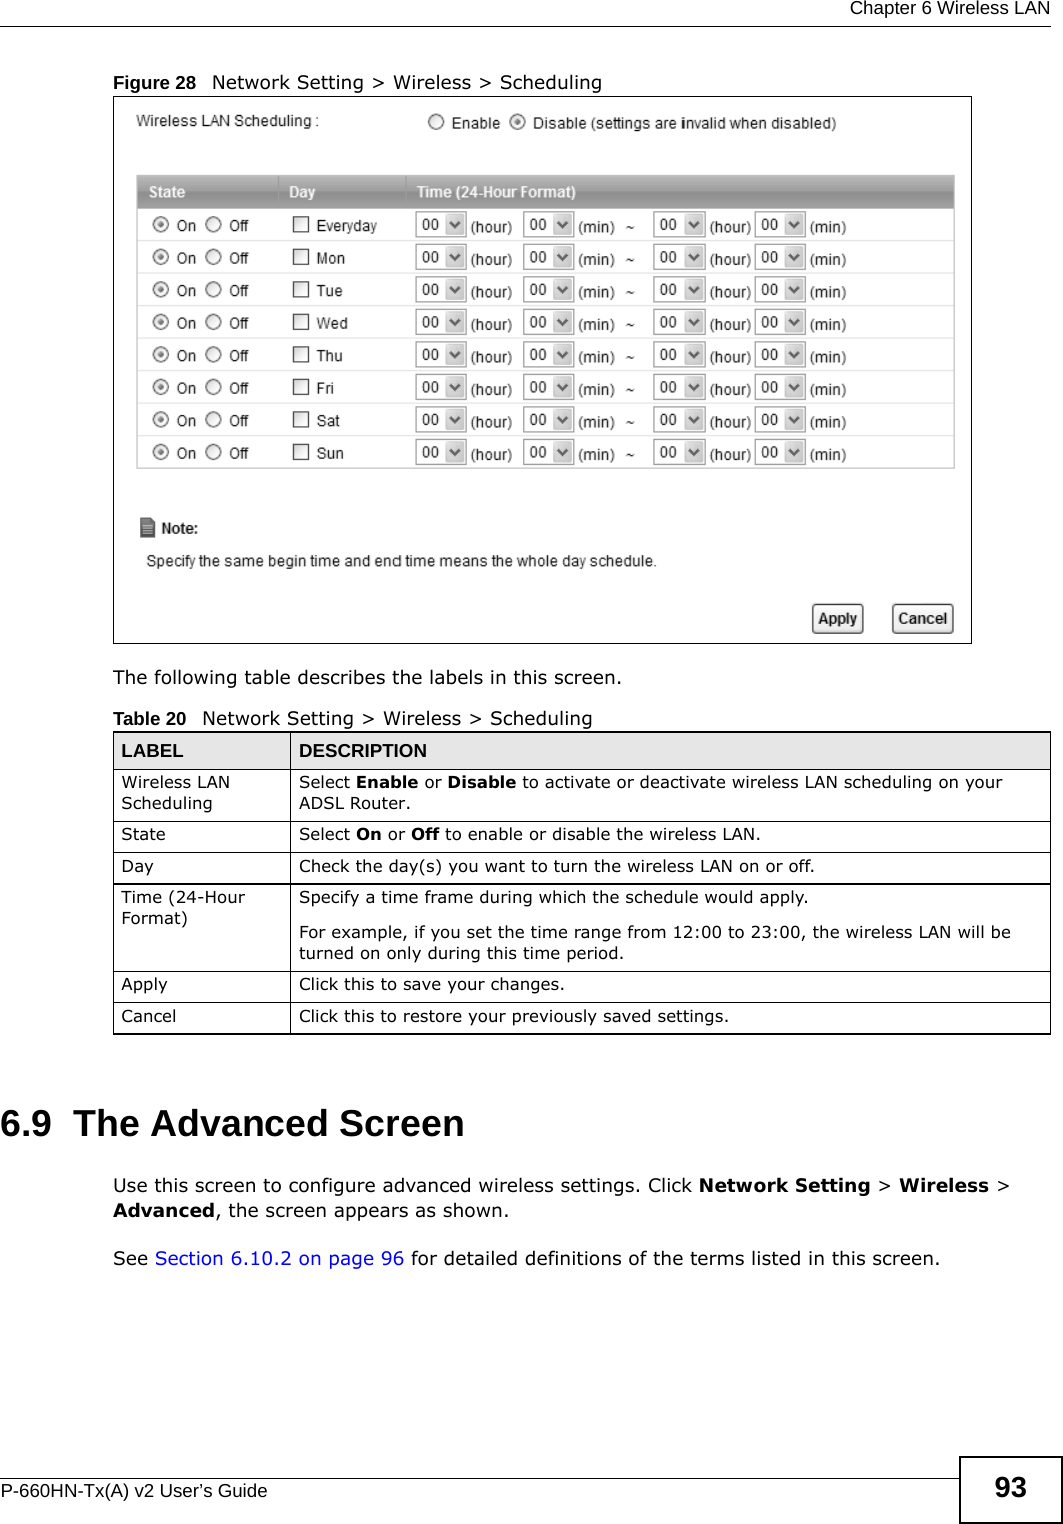  Chapter 6 Wireless LANP-660HN-Tx(A) v2 User’s Guide 93Figure 28   Network Setting &gt; Wireless &gt; SchedulingThe following table describes the labels in this screen.6.9  The Advanced ScreenUse this screen to configure advanced wireless settings. Click Network Setting &gt; Wireless &gt; Advanced, the screen appears as shown.See Section 6.10.2 on page 96 for detailed definitions of the terms listed in this screen.Table 20   Network Setting &gt; Wireless &gt; SchedulingLABEL DESCRIPTIONWireless LAN SchedulingSelect Enable or Disable to activate or deactivate wireless LAN scheduling on your ADSL Router.State Select On or Off to enable or disable the wireless LAN.Day Check the day(s) you want to turn the wireless LAN on or off.Time (24-Hour Format)Specify a time frame during which the schedule would apply.For example, if you set the time range from 12:00 to 23:00, the wireless LAN will be turned on only during this time period.Apply Click this to save your changes.Cancel Click this to restore your previously saved settings.